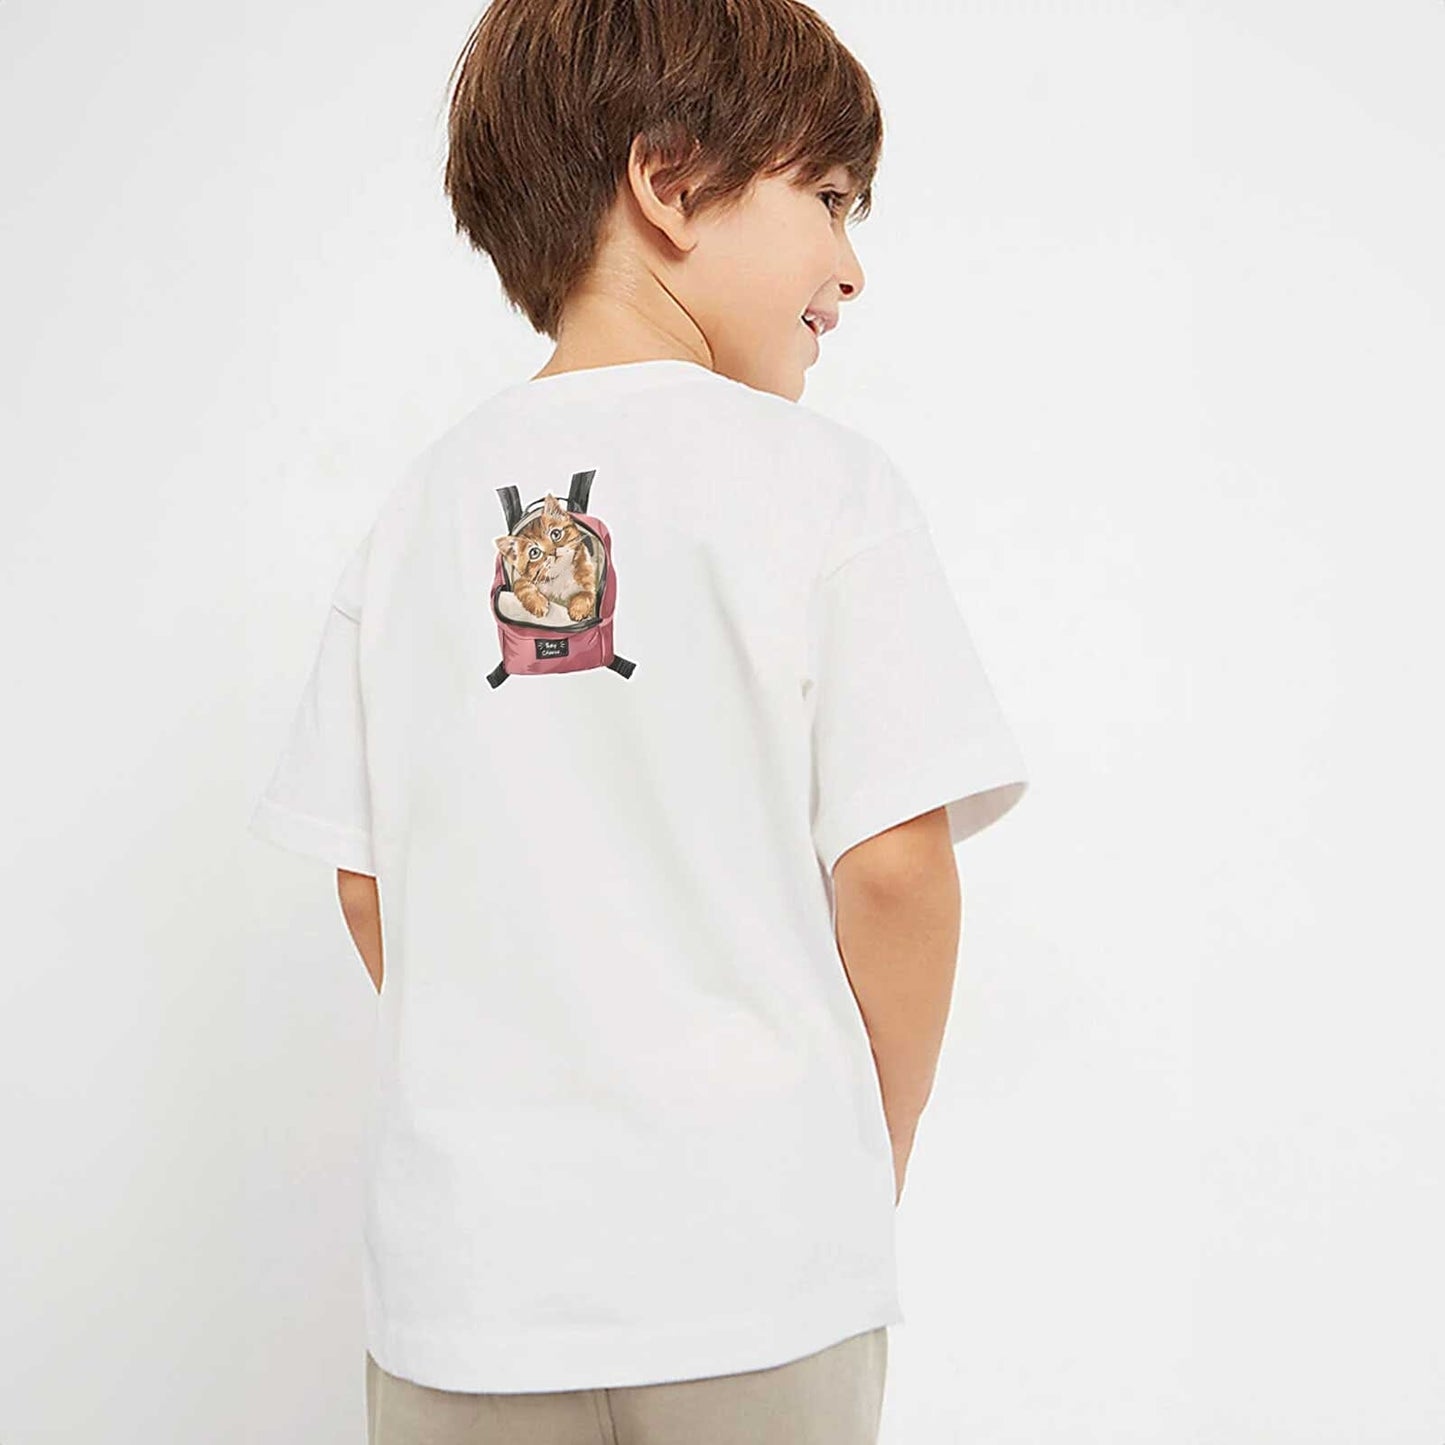 Polo Republica Boy's Say Cheese Cat Printed Tee Shirt Boy's Tee Shirt Polo Republica White 1-2 Years 